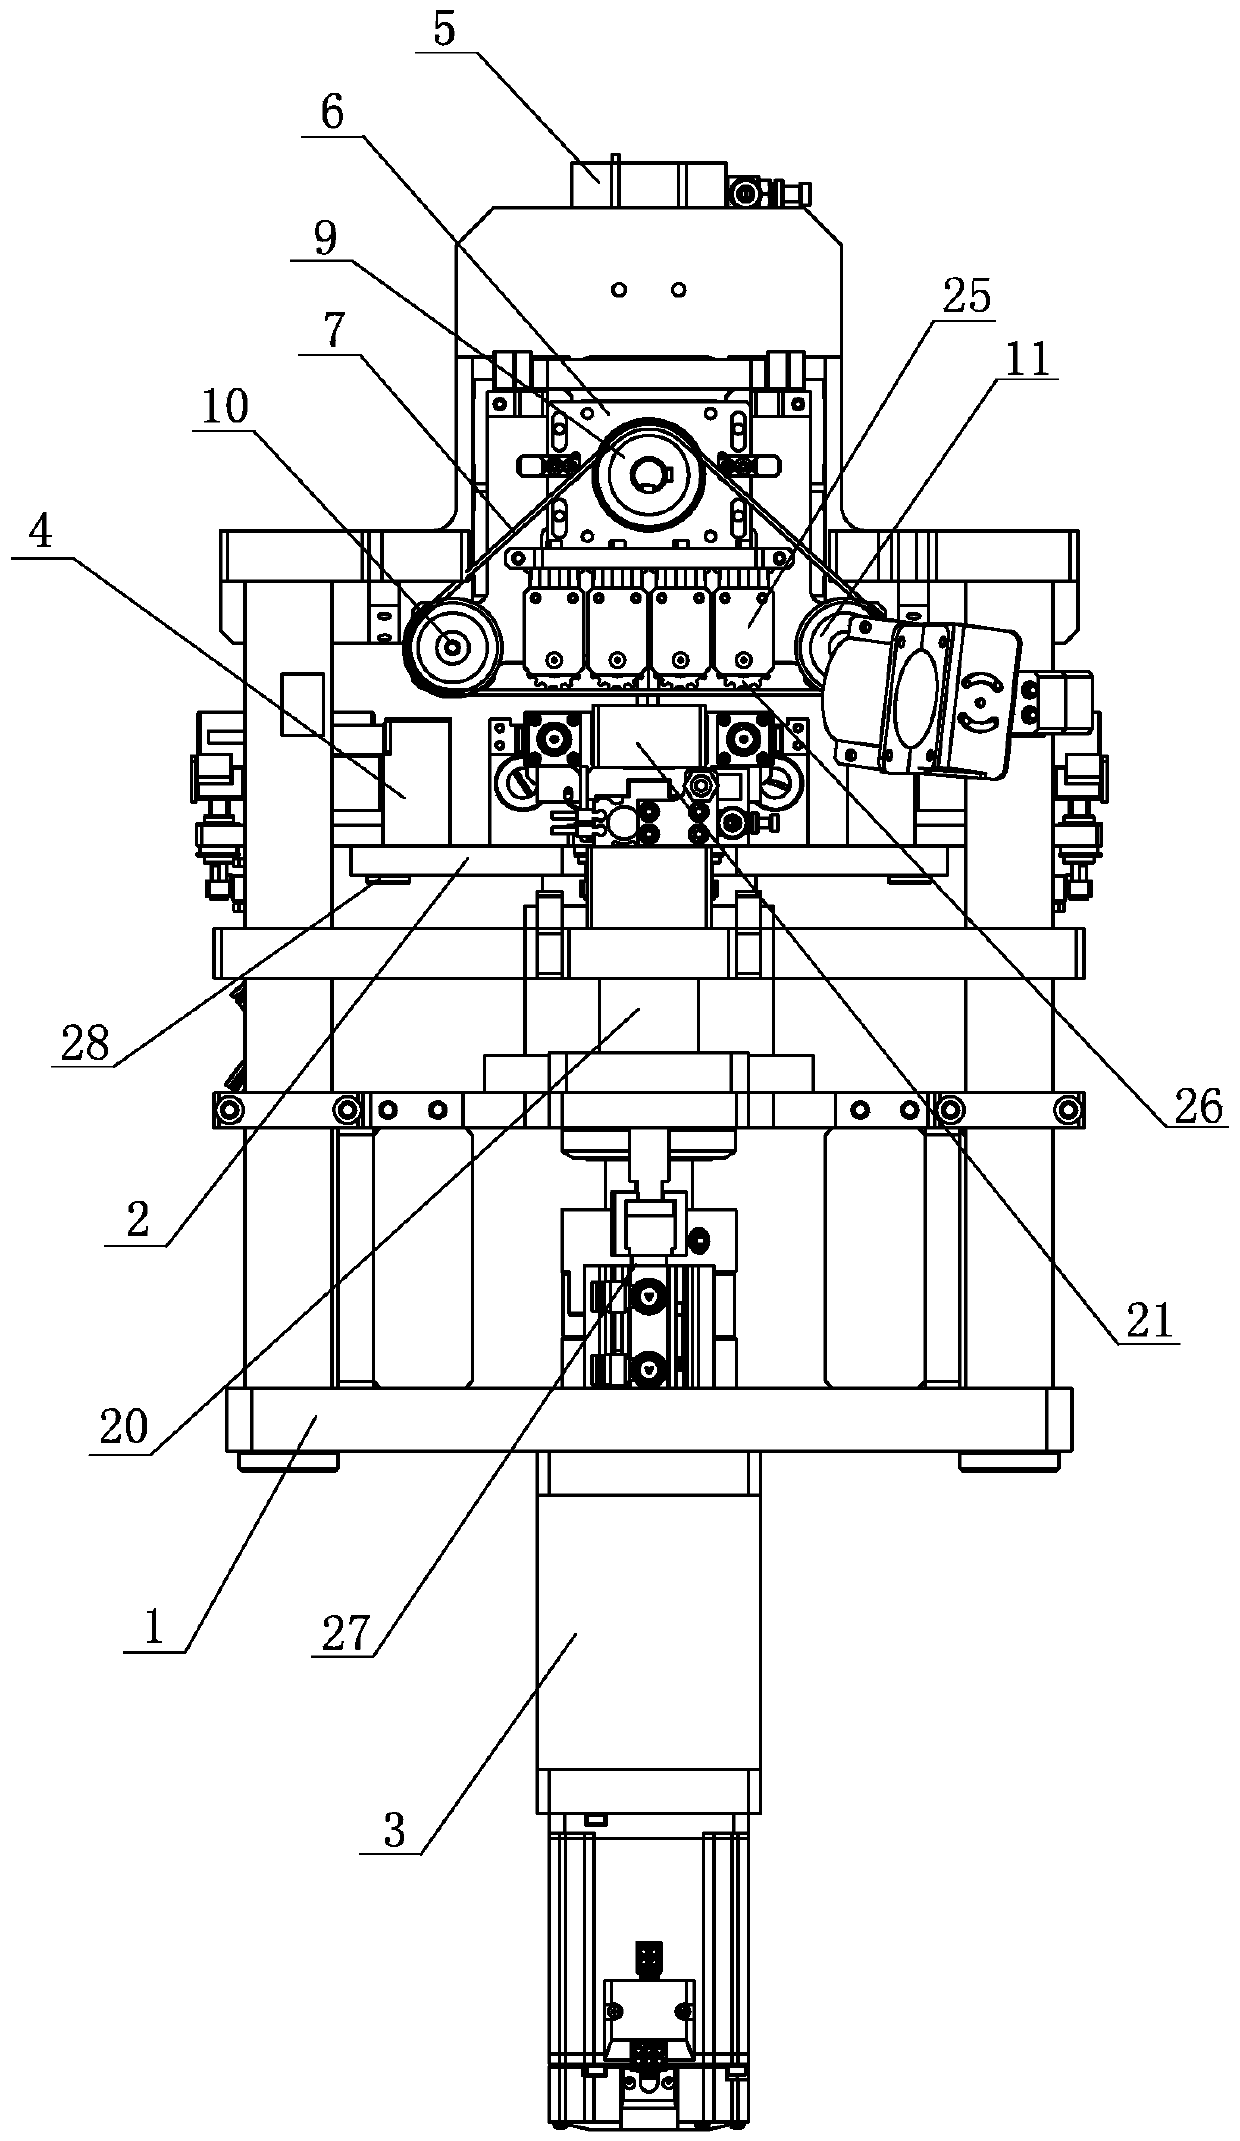 Limiting device for laser ring cutting of battery cell